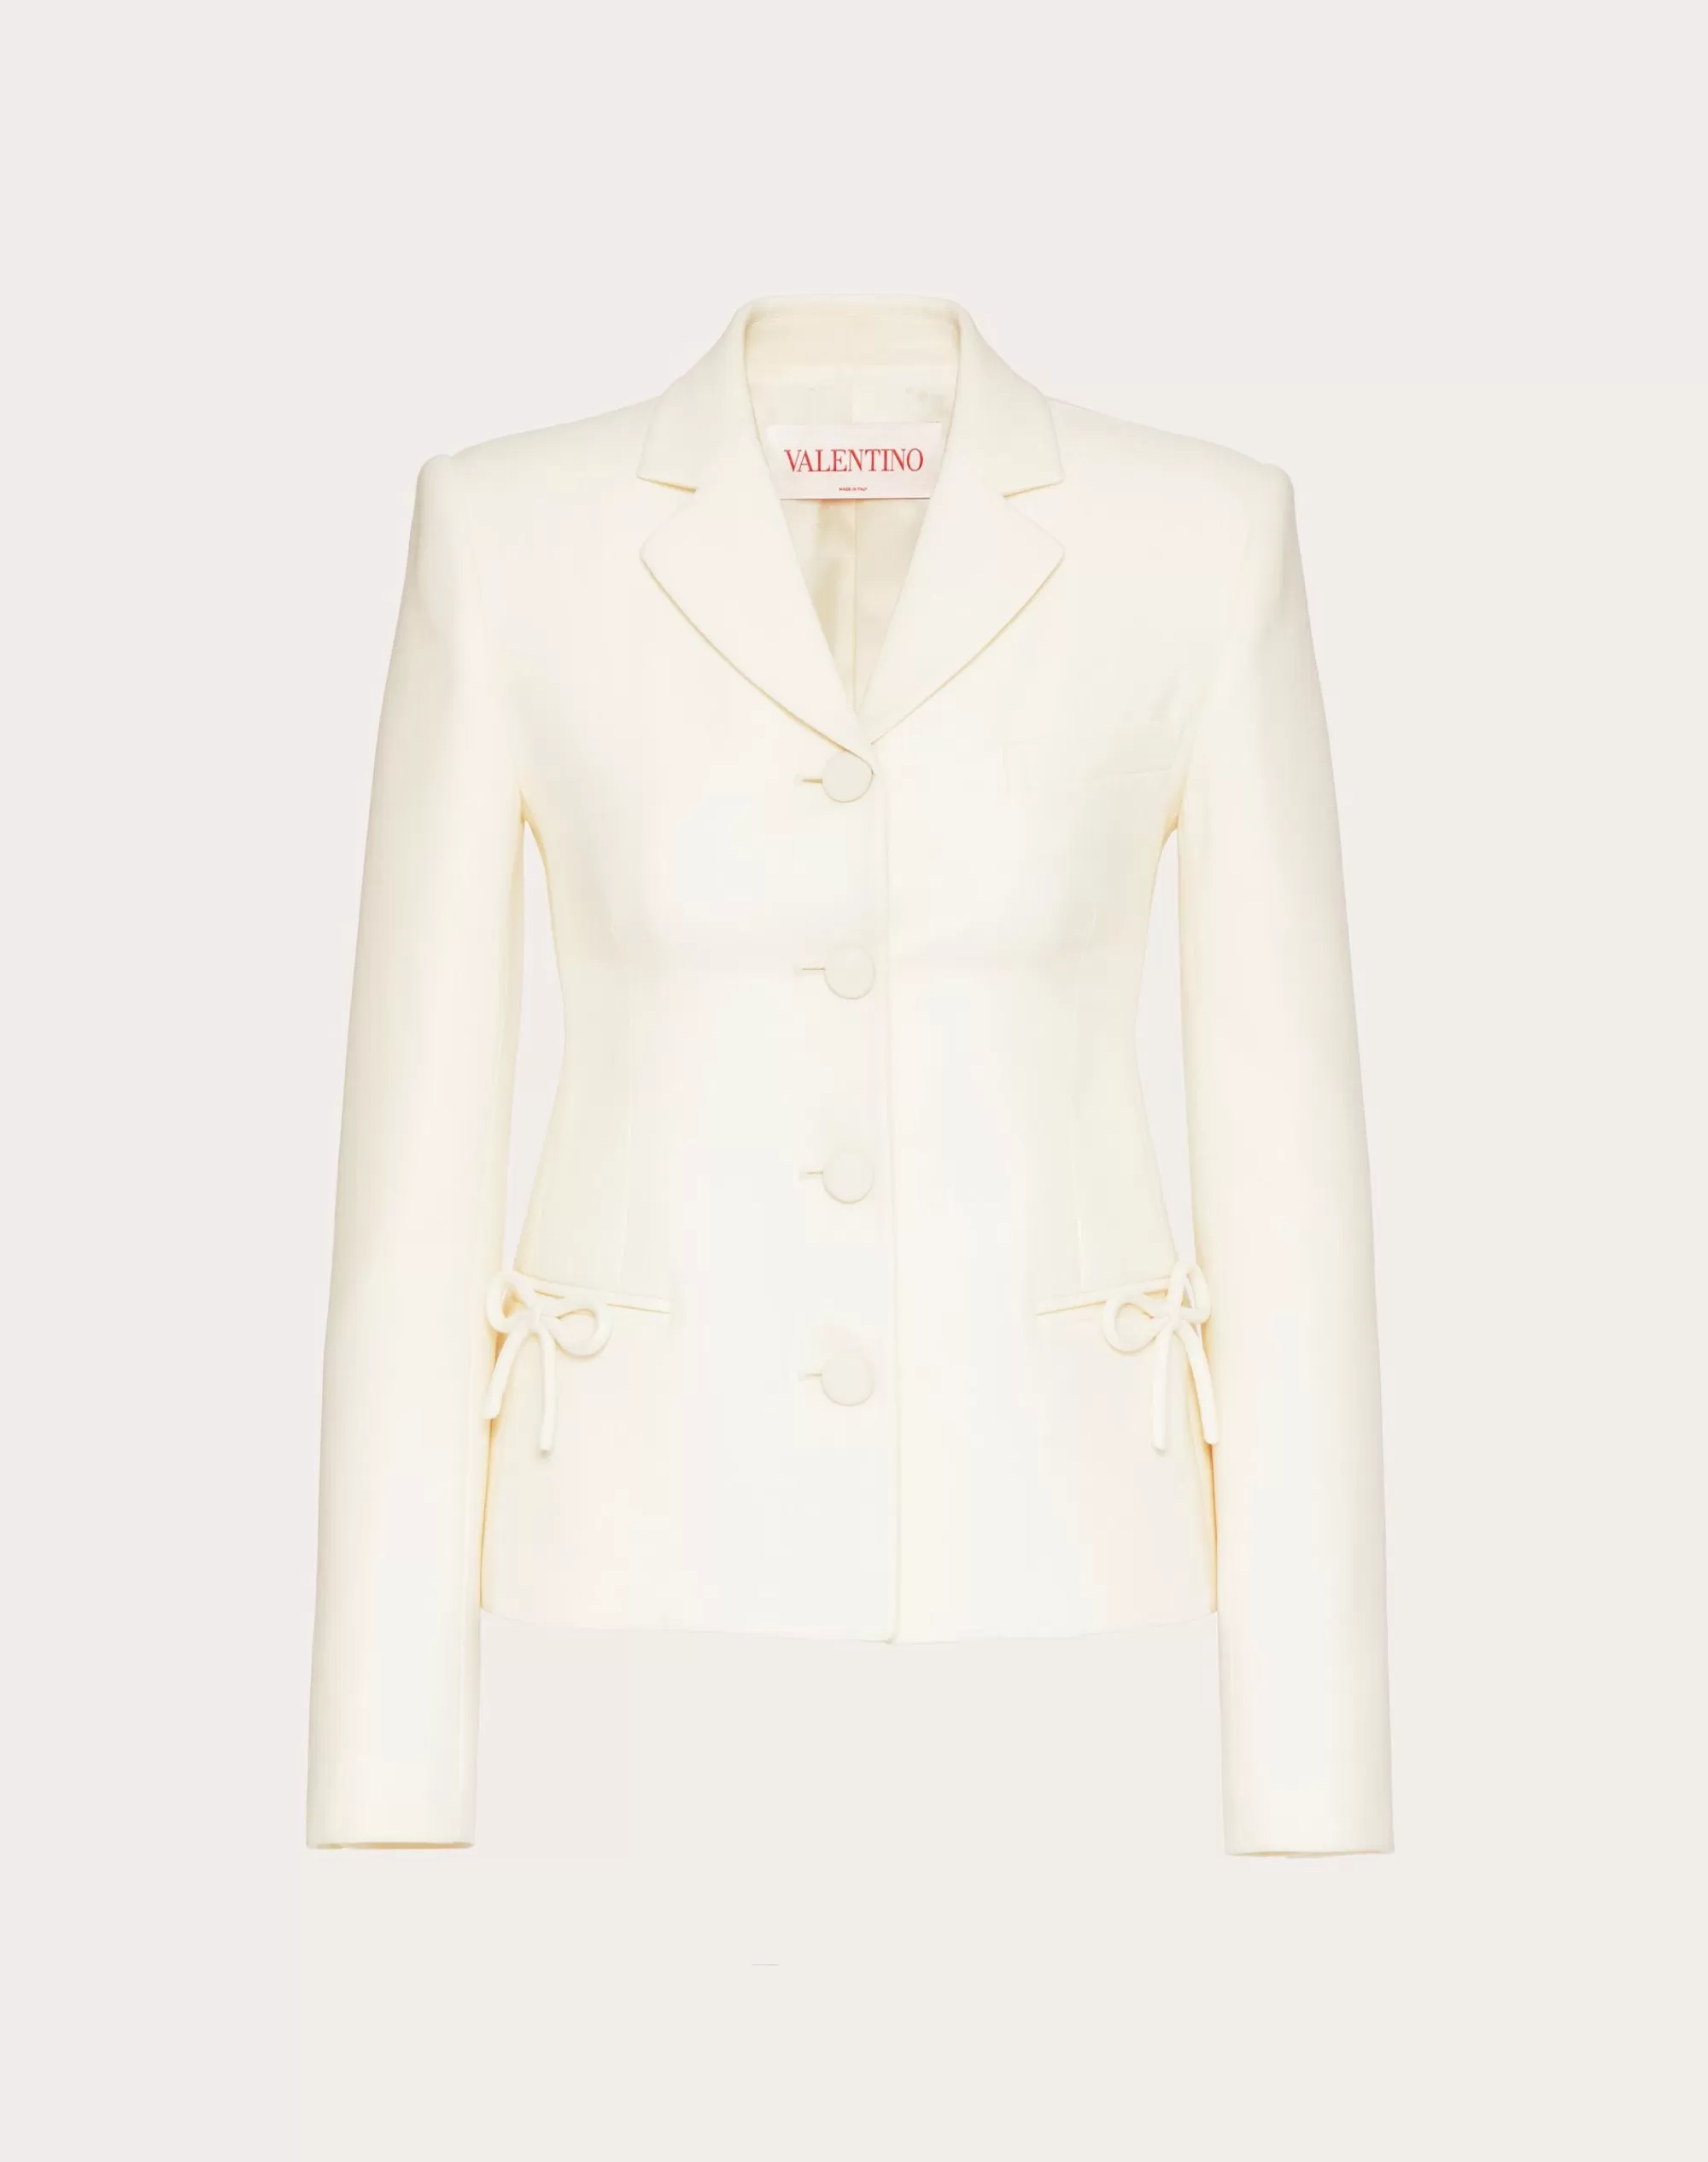 Valentino CREPE COUTURE JACKET Ivory Online